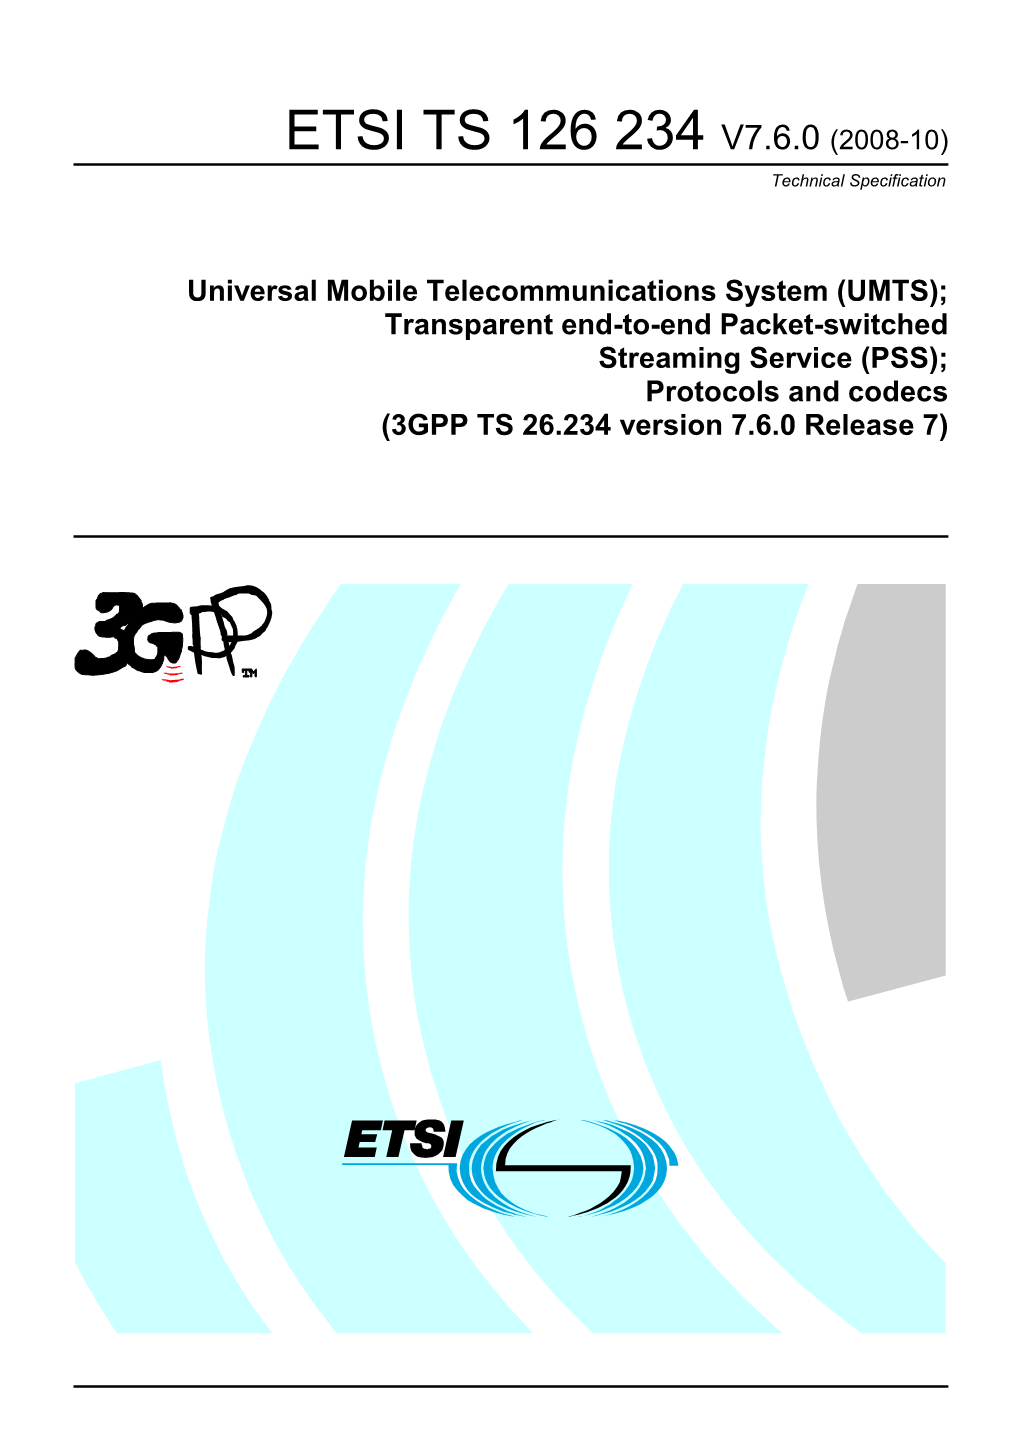 UMTS); Transparent End-To-End Packet-Switched Streaming Service (PSS); Protocols and Codecs (3GPP TS 26.234 Version 7.6.0 Release 7)